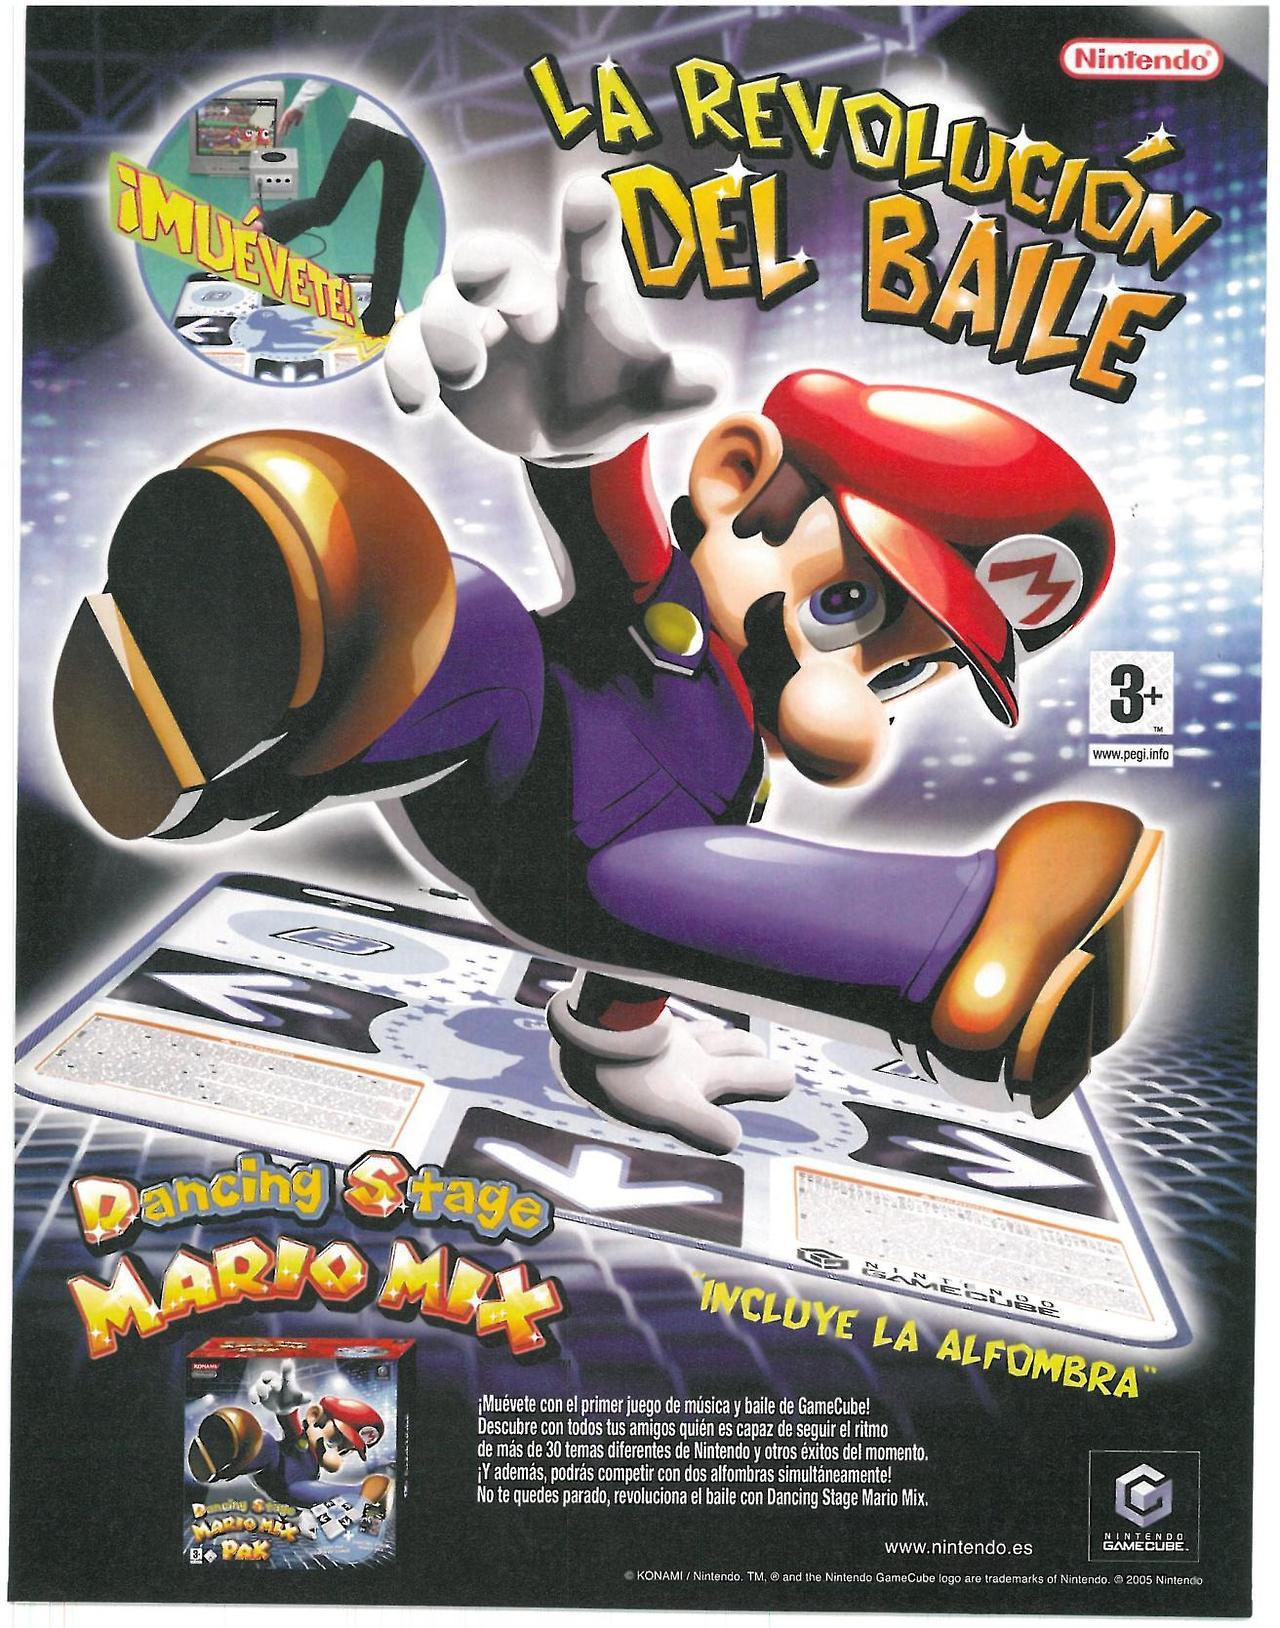 ‘Dancing Stage: Mario Mix’
[aka: ‘Dance Dance Revolution: Mario Mix’][GCN] [SPAIN] [MAGAZINE] [2005]
“ “Dance Dance Revolution: Mario Mix is the second dancing game to be released on the Nintendo GameCube. Mario Mix is not as intense as standard...